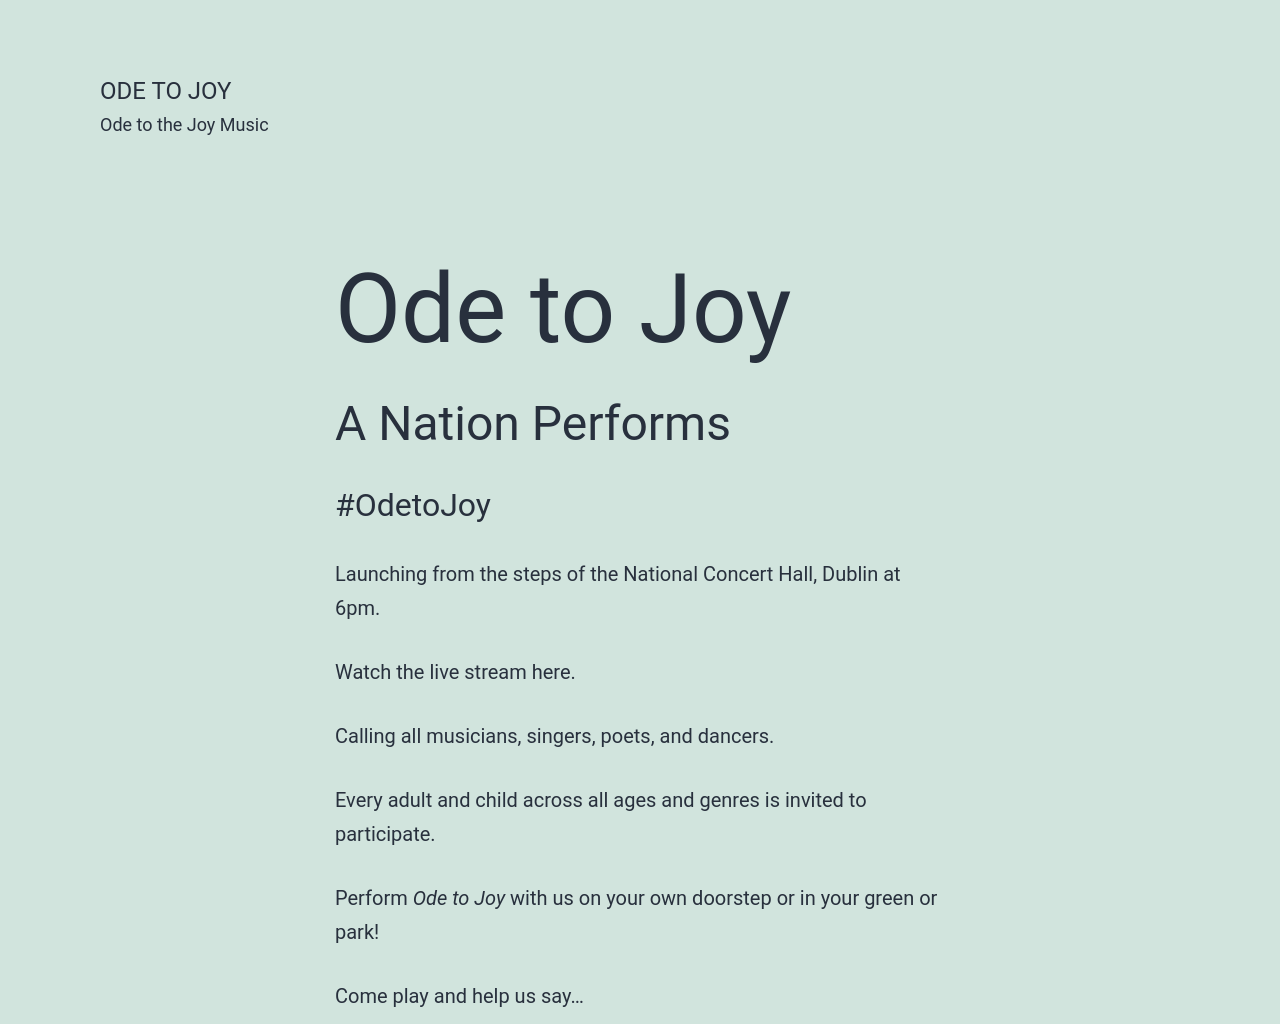 Ode to Joy- celebrating Frontline workers- Sunday, 21st of June from 6-7pm